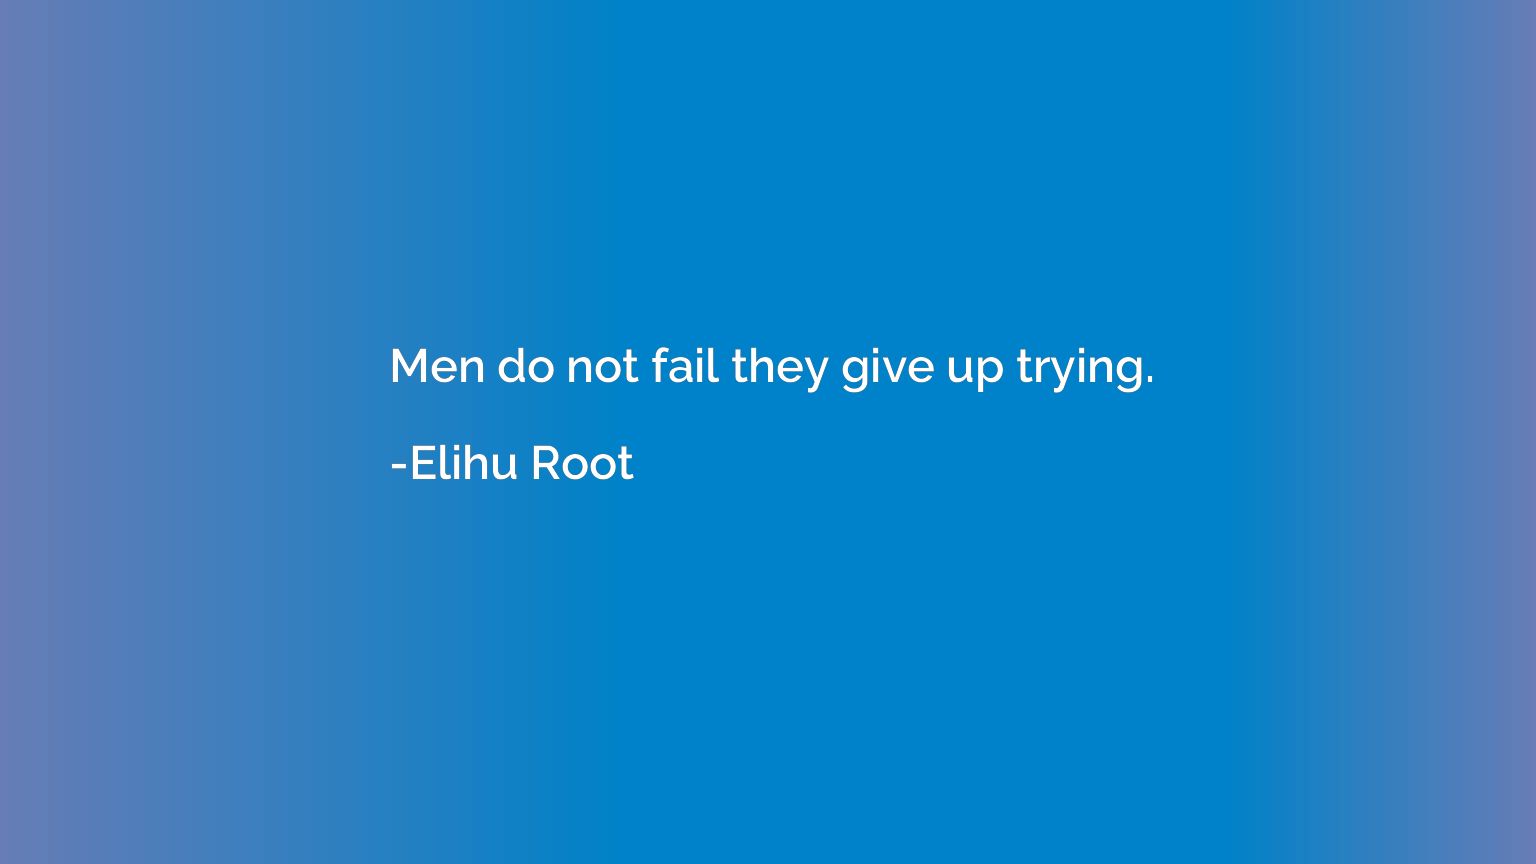 Men do not fail they give up trying.